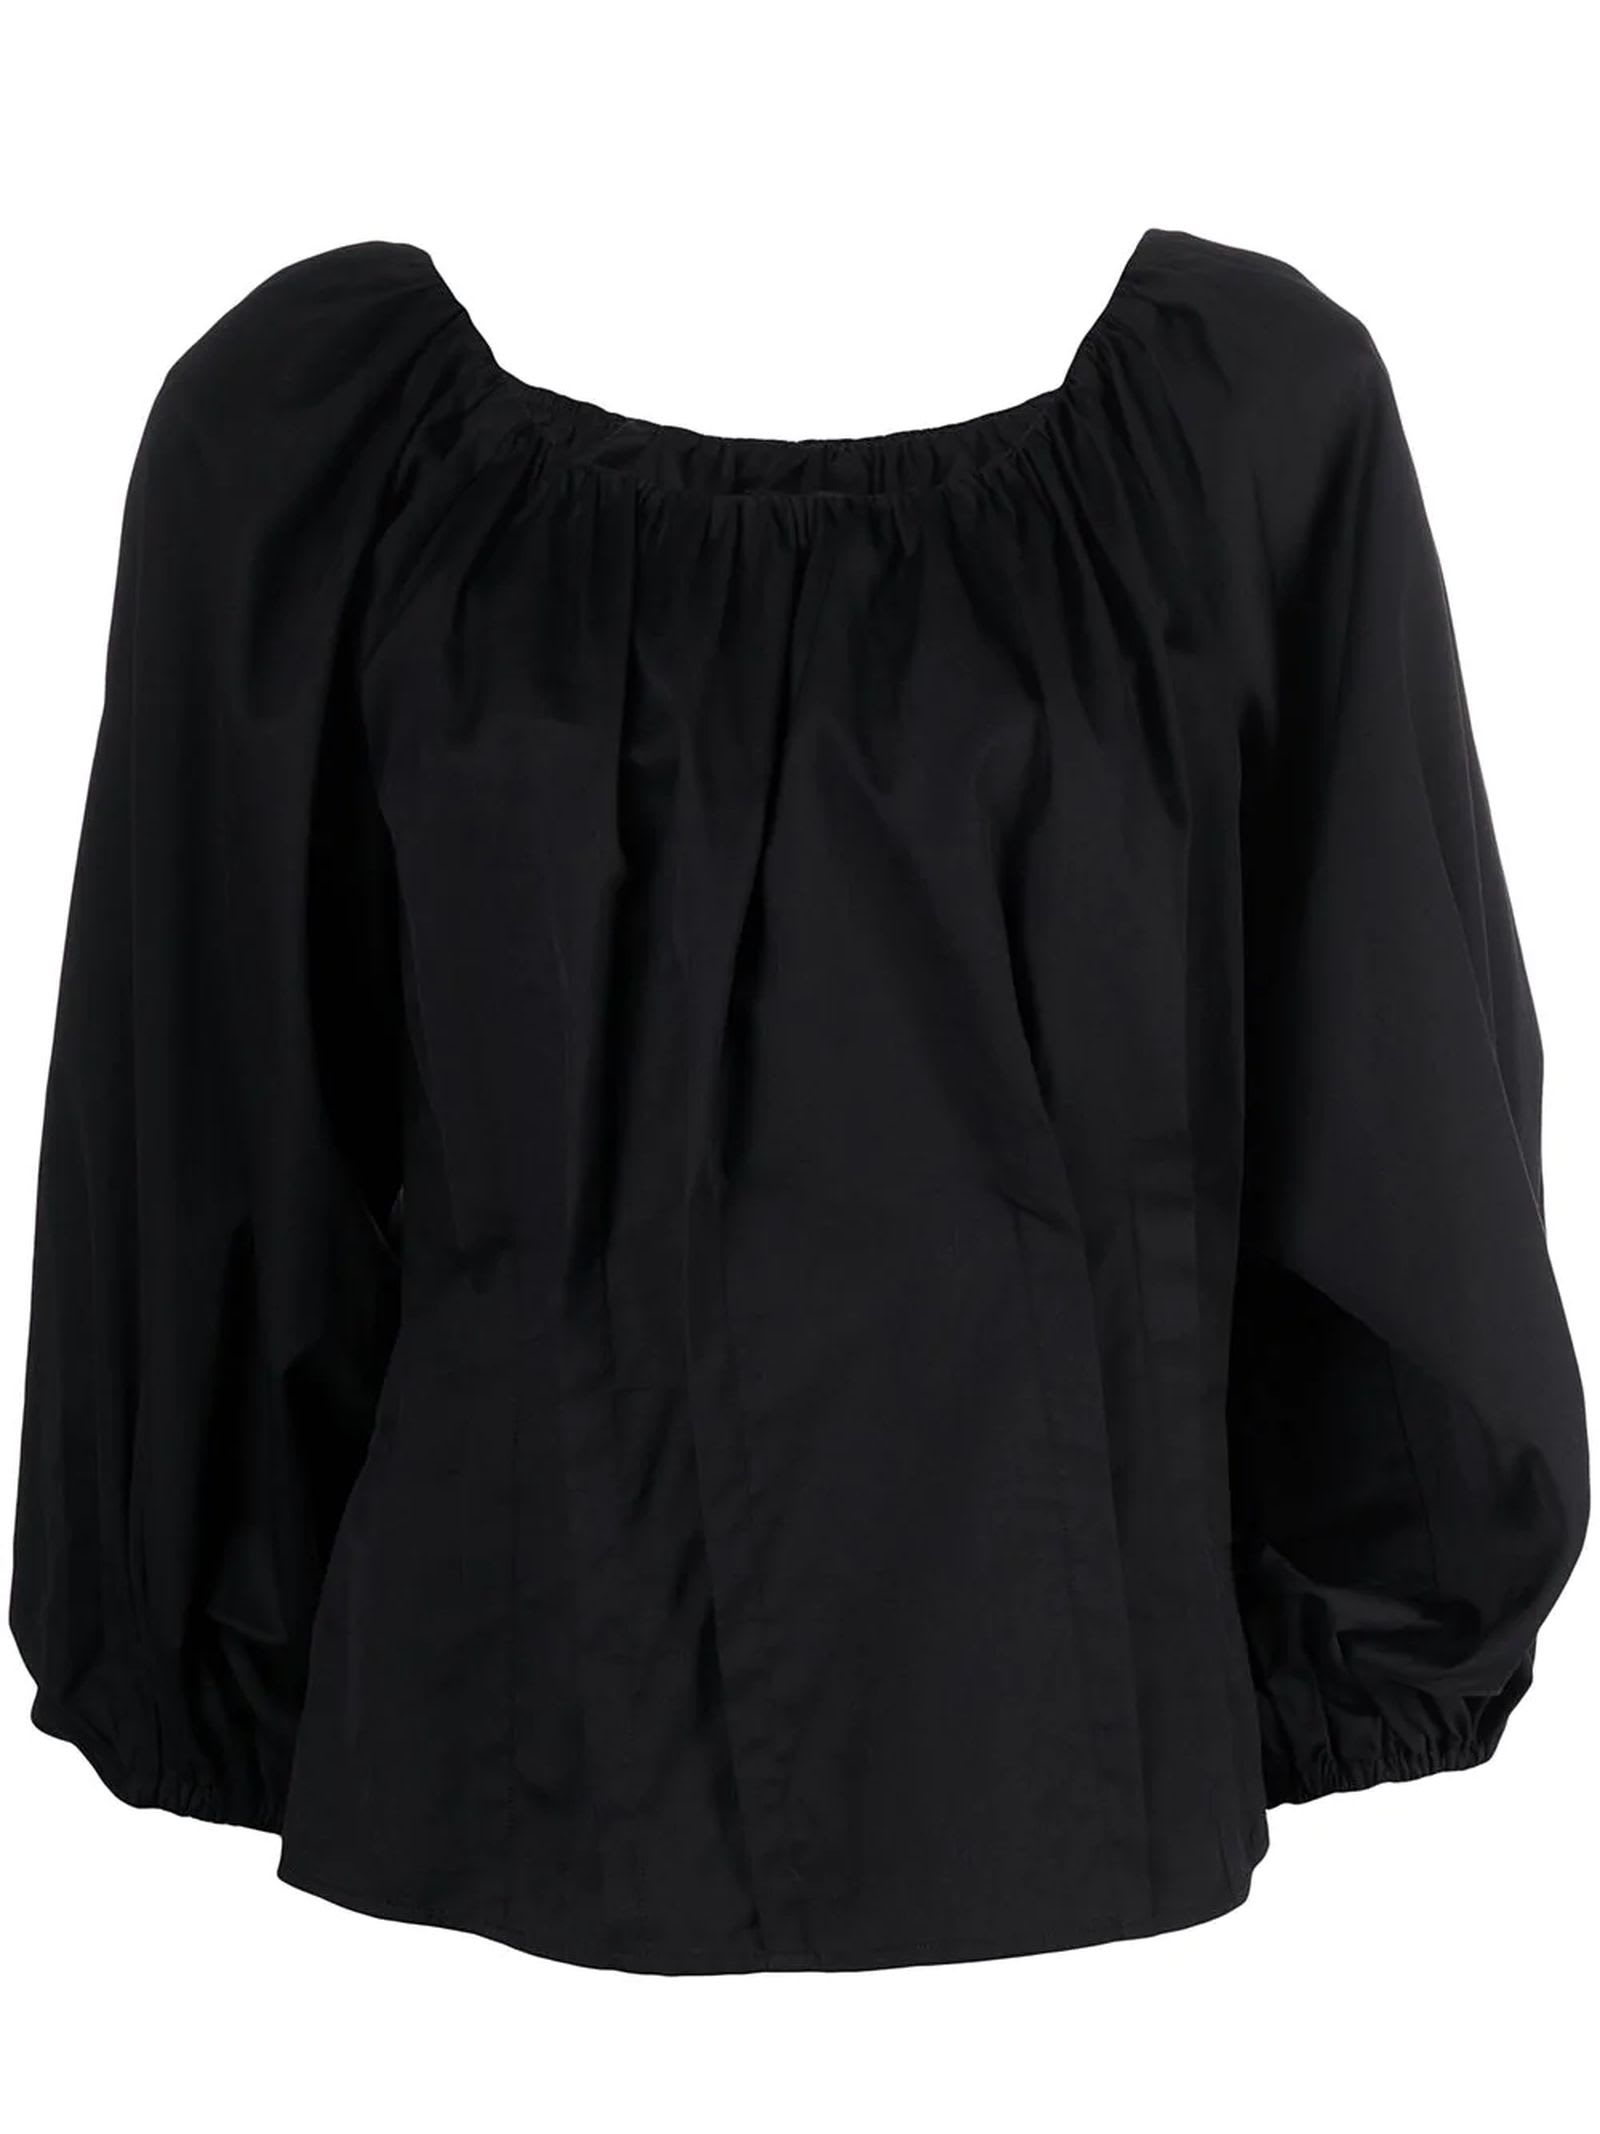 Federica Tosi Black Silk And Cotton Blouse